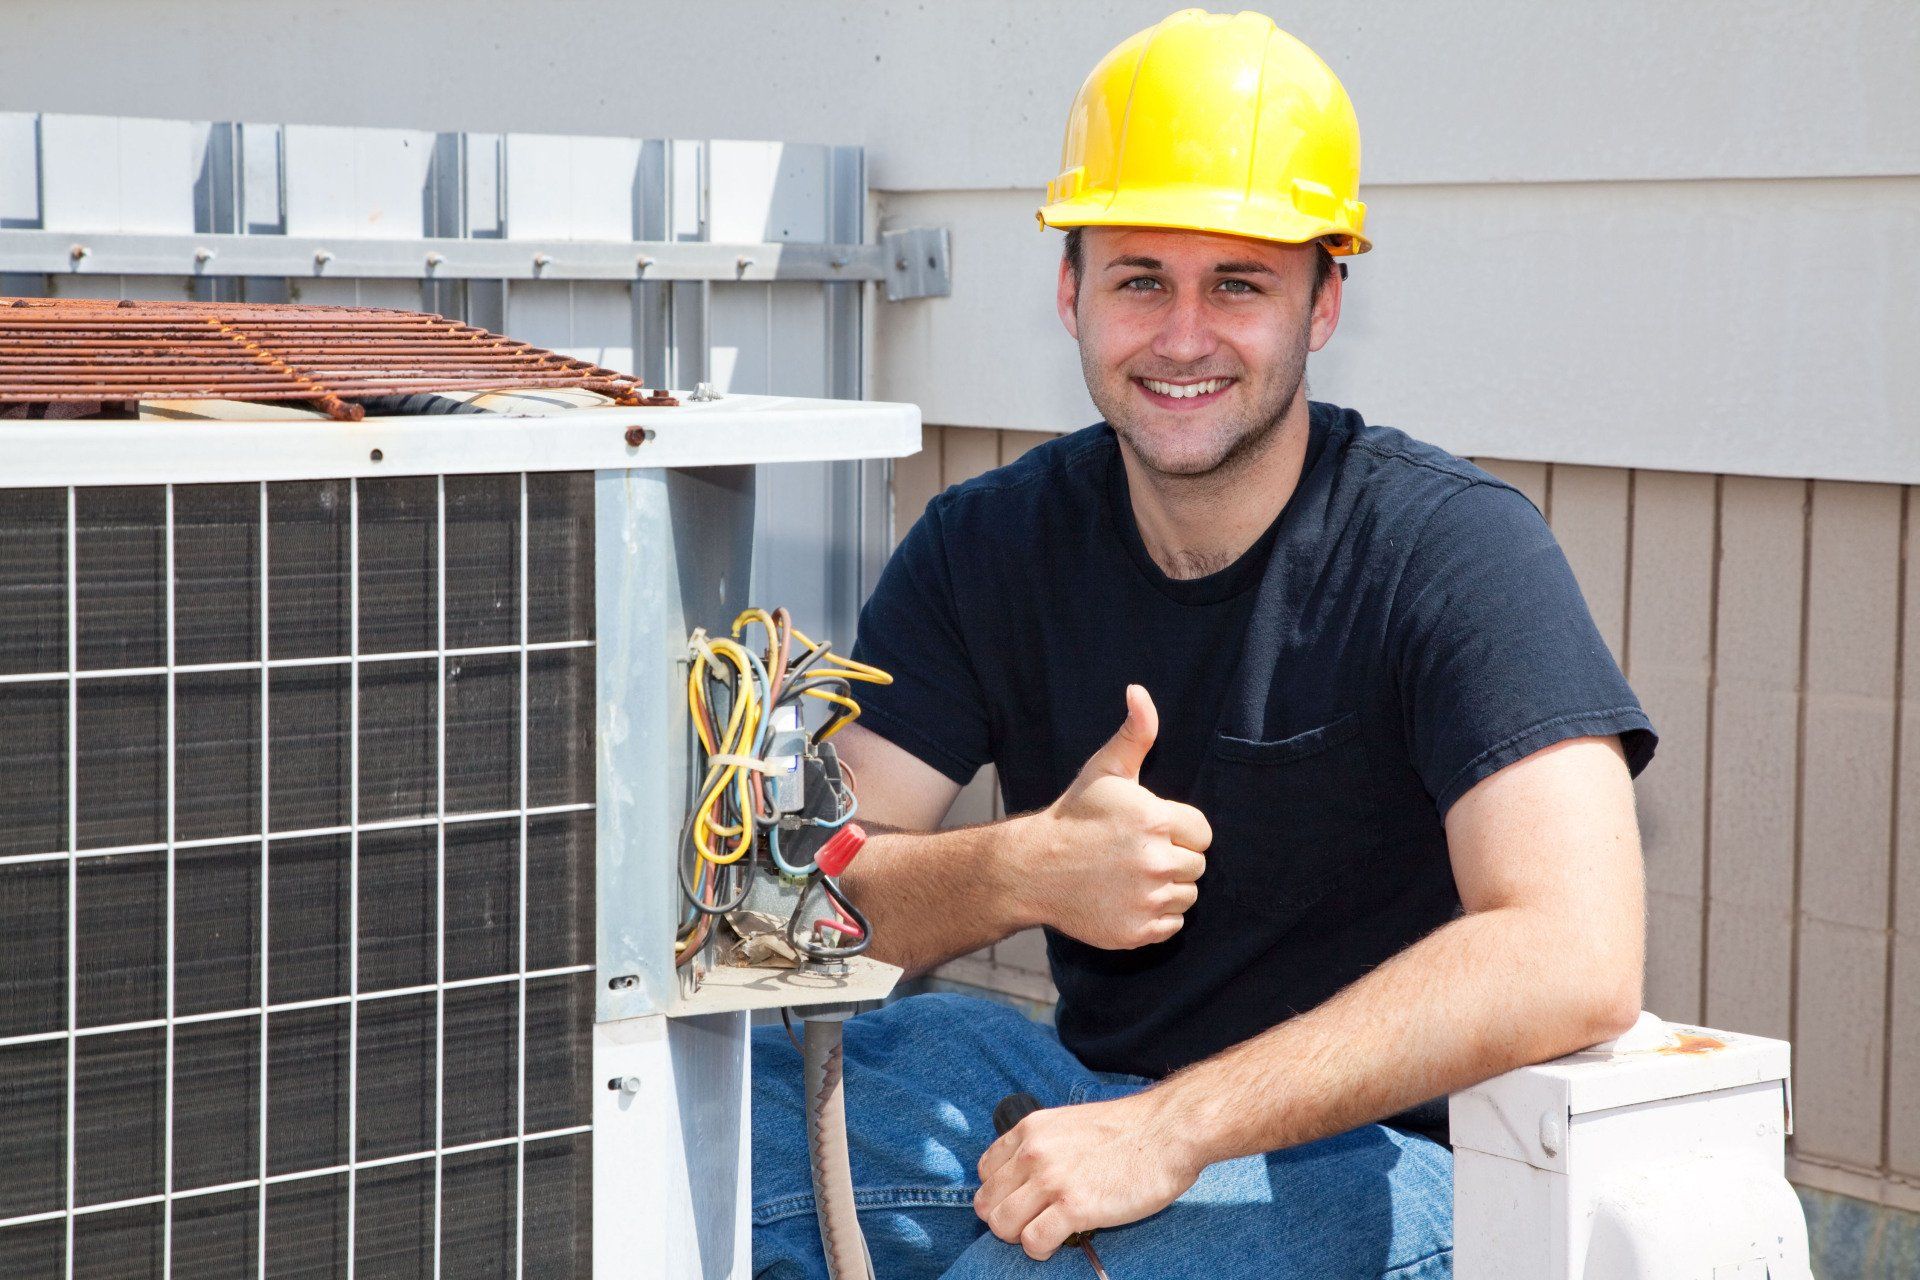 heating and air conditioning service